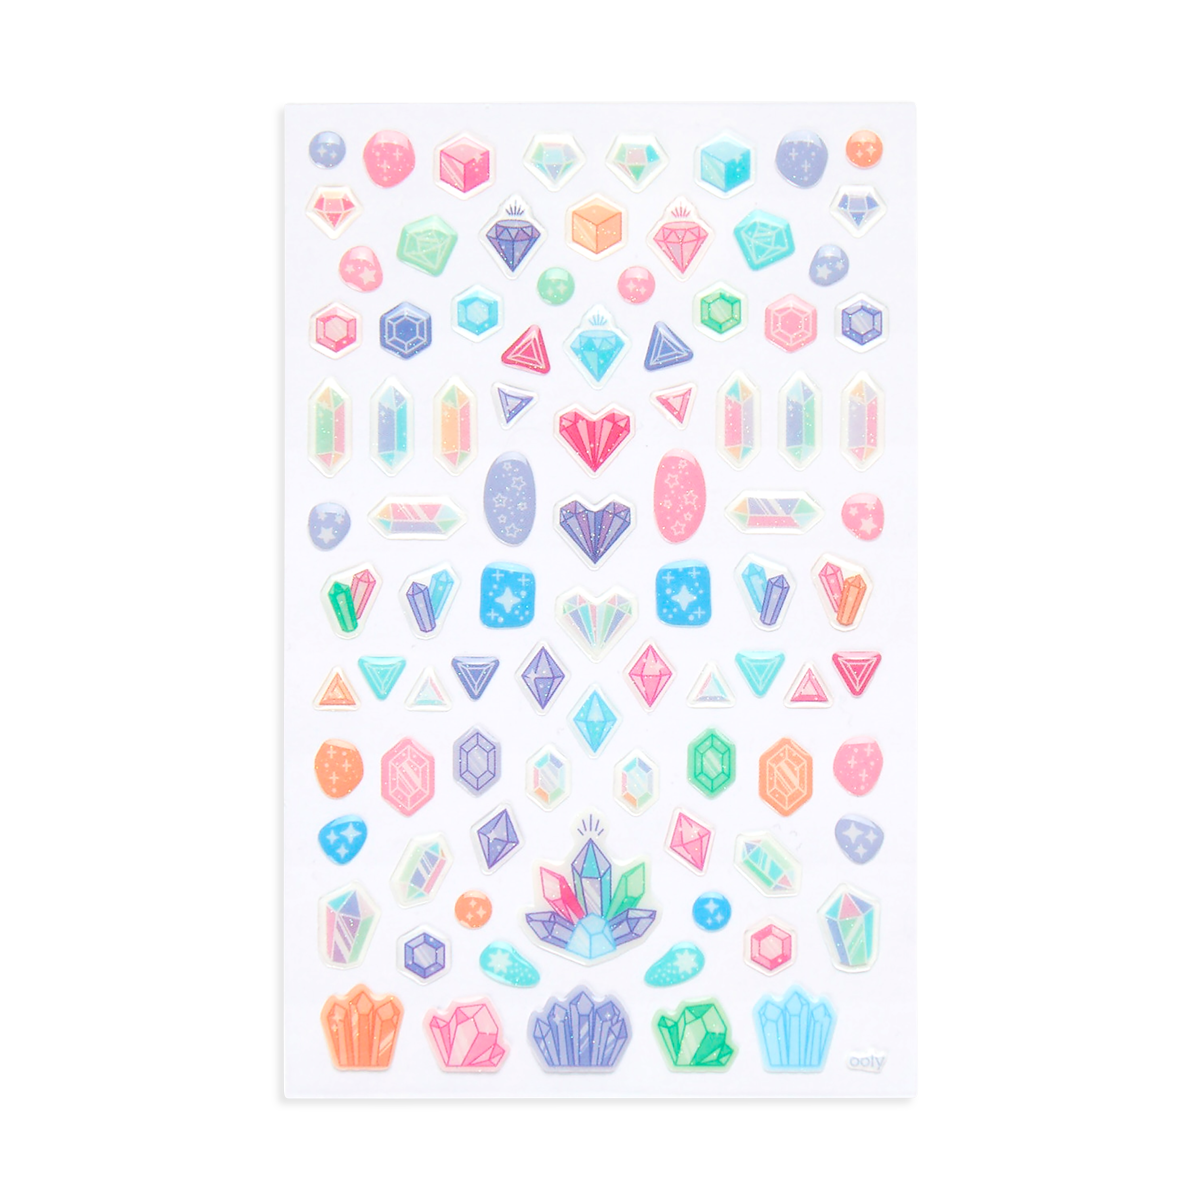 OOLY watercolor glitter and neon 12 colors 6 yrs – PSiloveyou